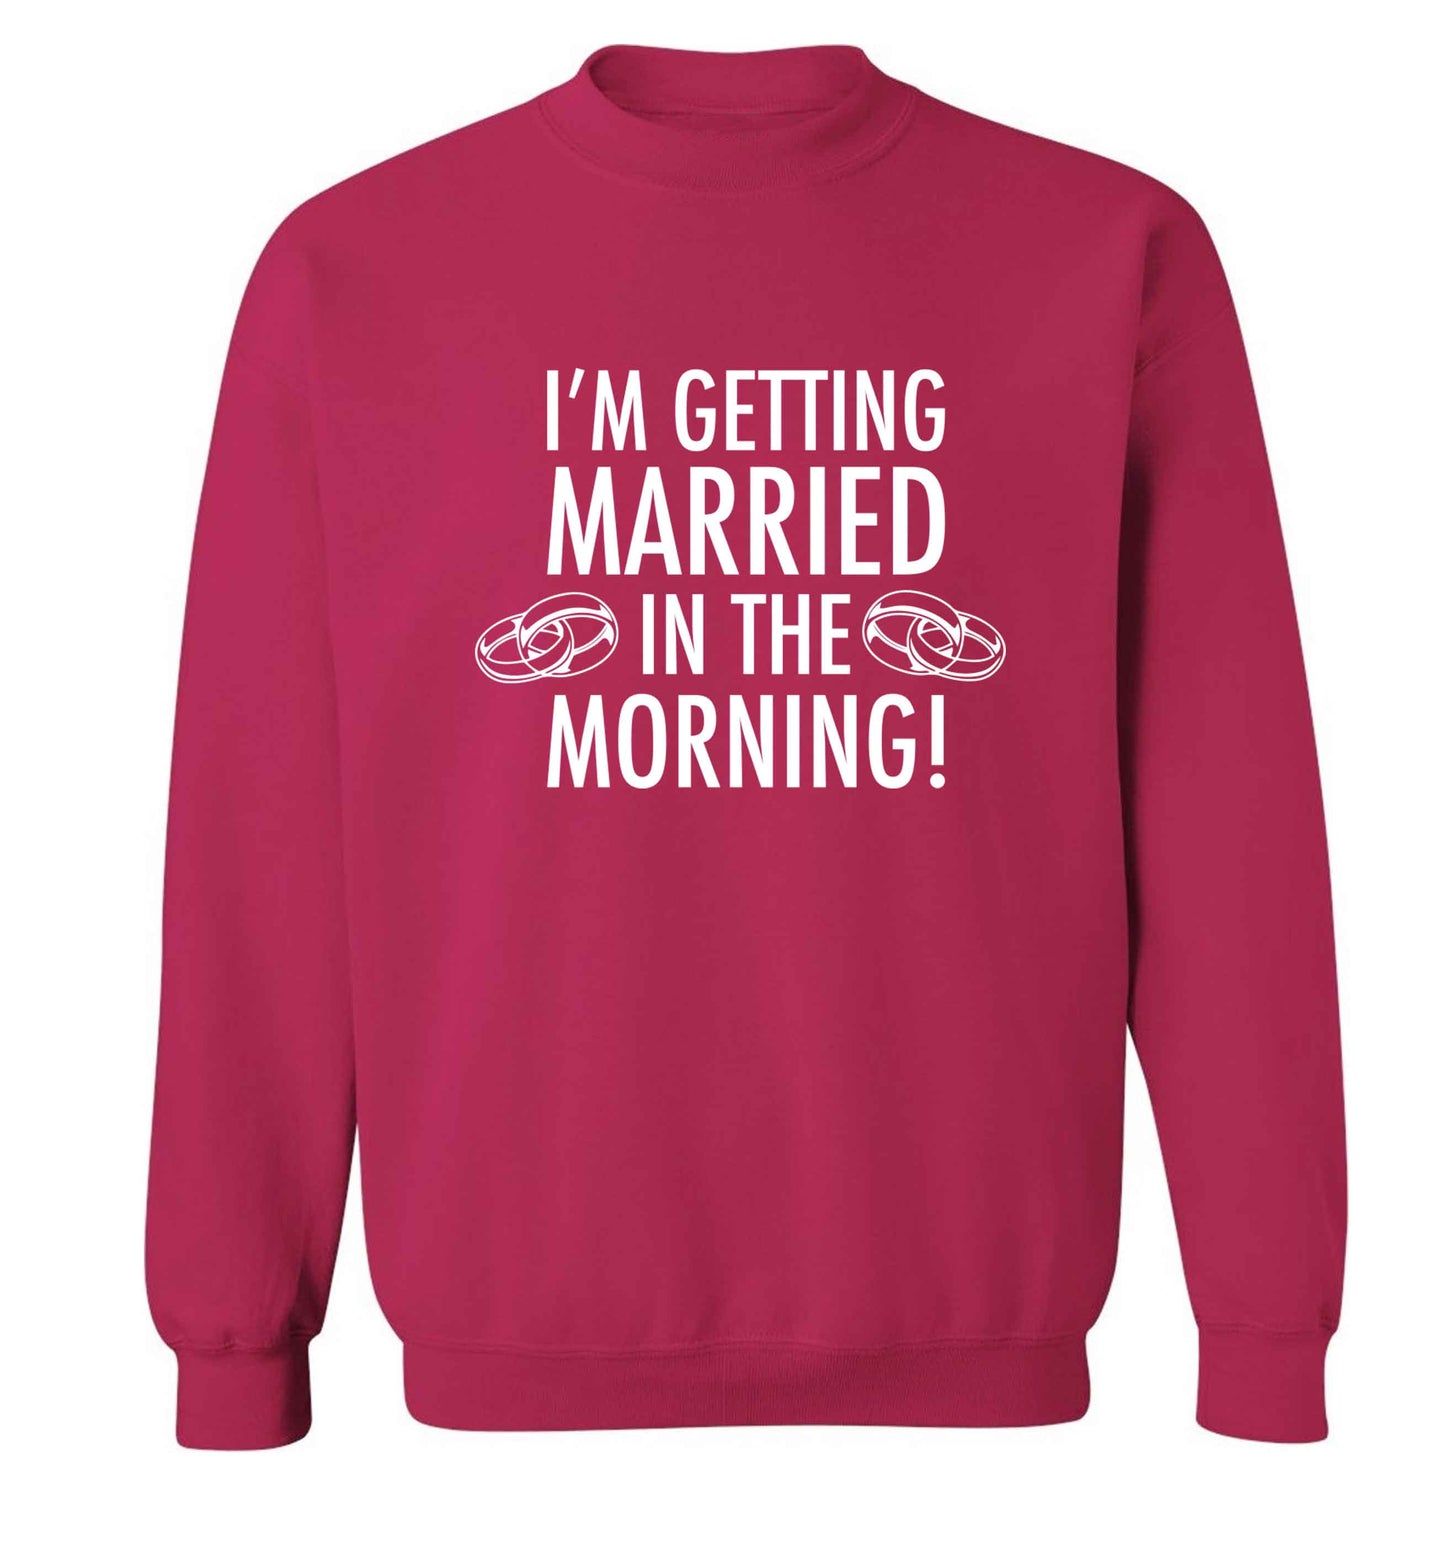 I'm getting married in the morning! adult's unisex pink sweater 2XL